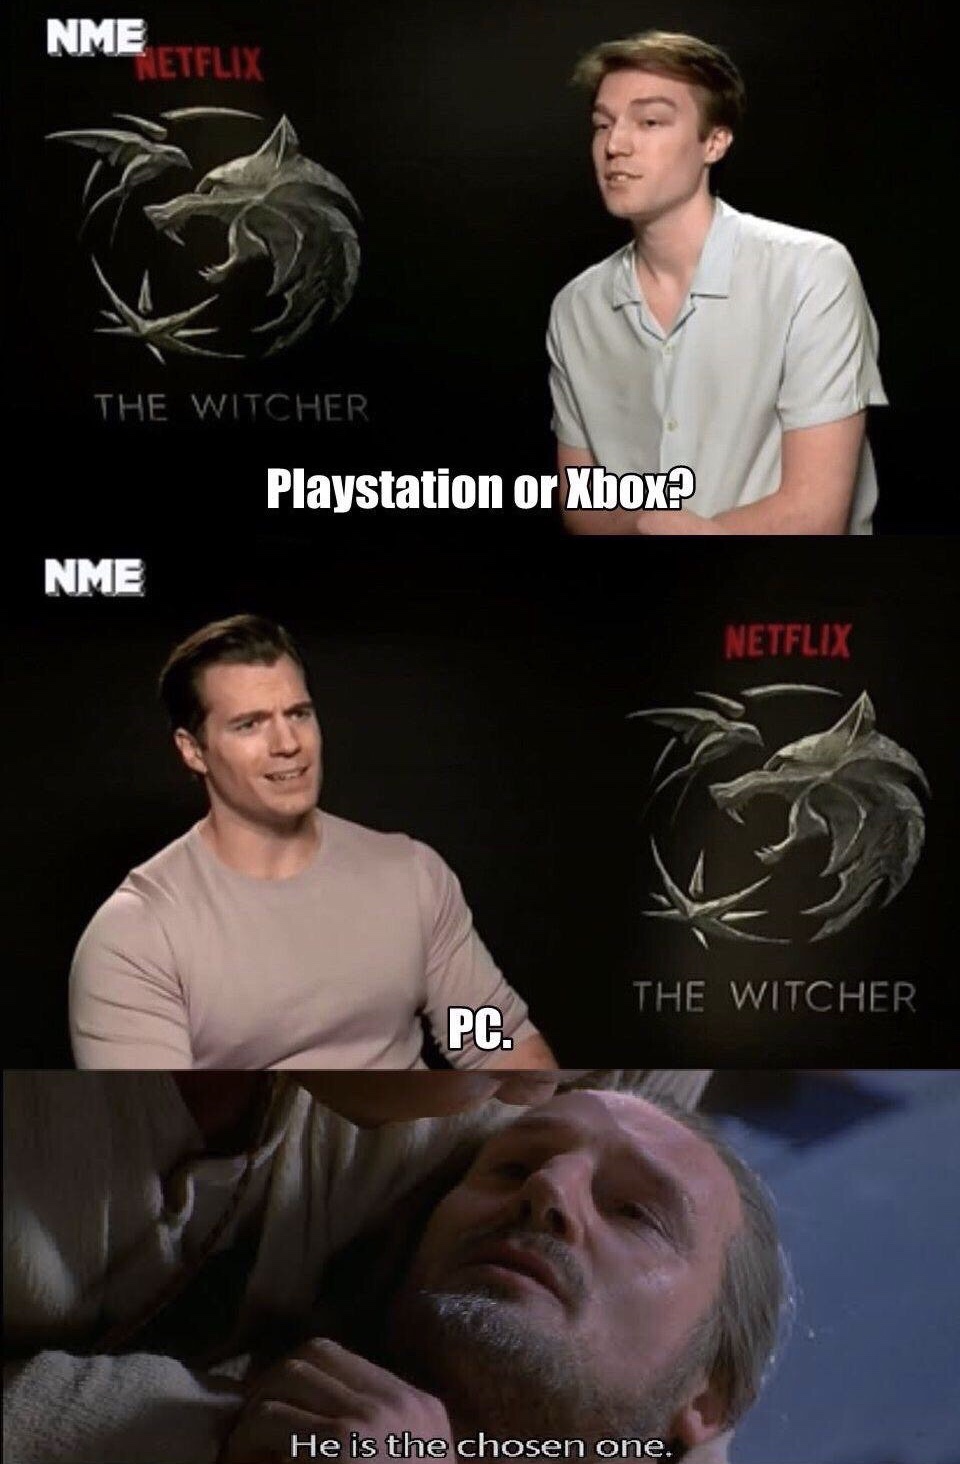 netflix the witcher playstation or xbox - Nme Retflix The Witcher Playstation or Xbox? Nme Netflix The Witcher Pc. He is the chosen one.